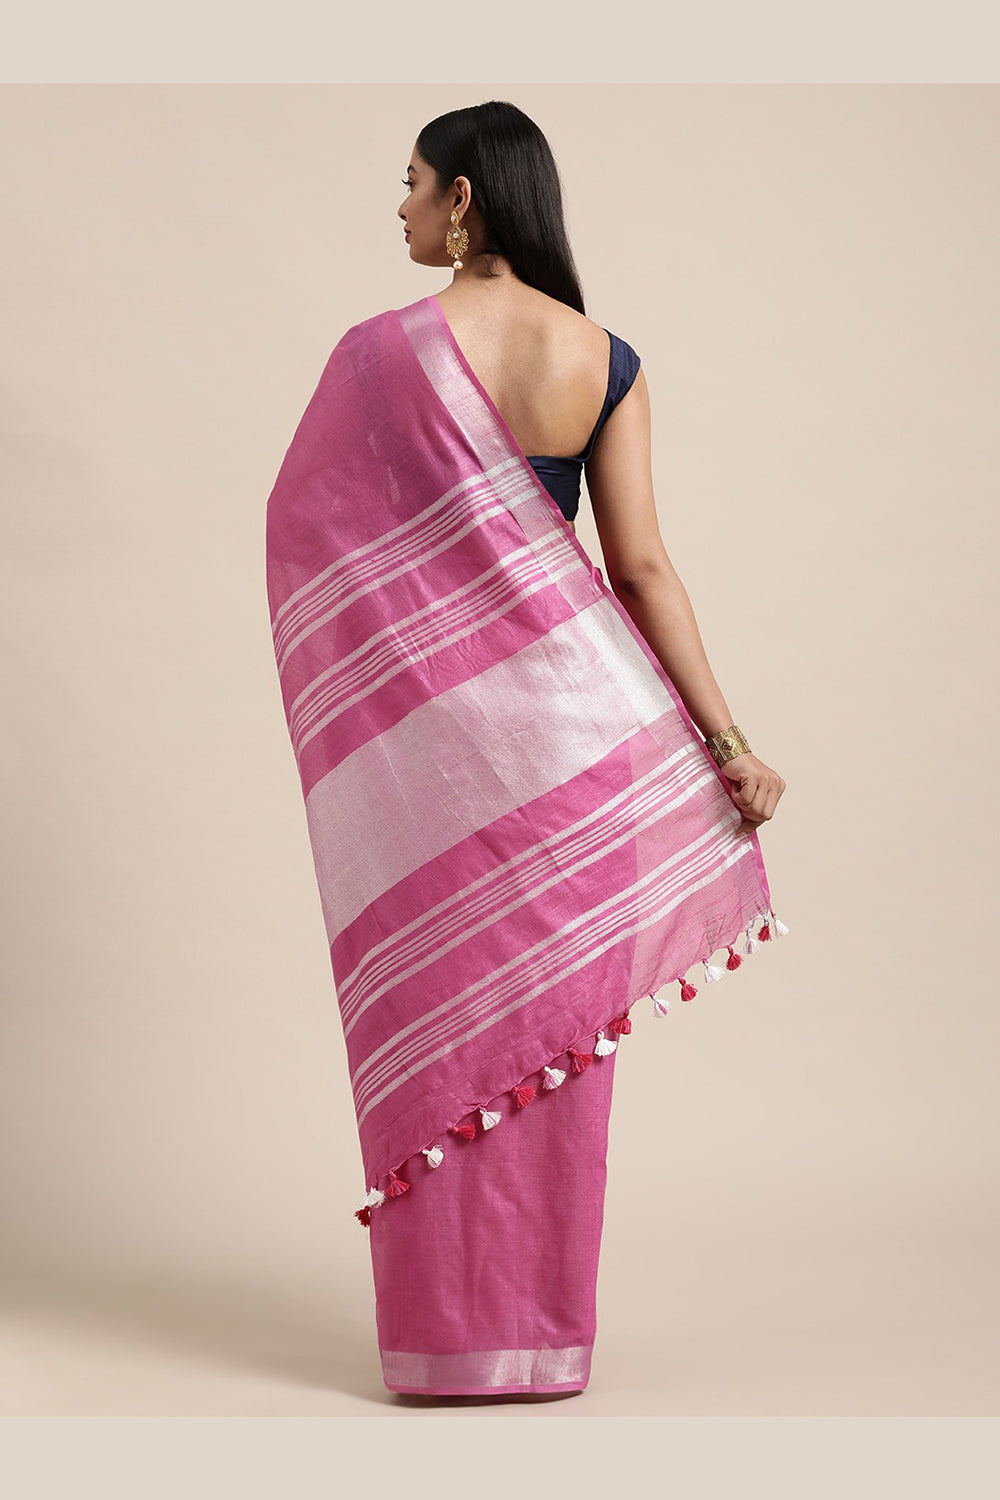 Shop One Minute Wearing Saree